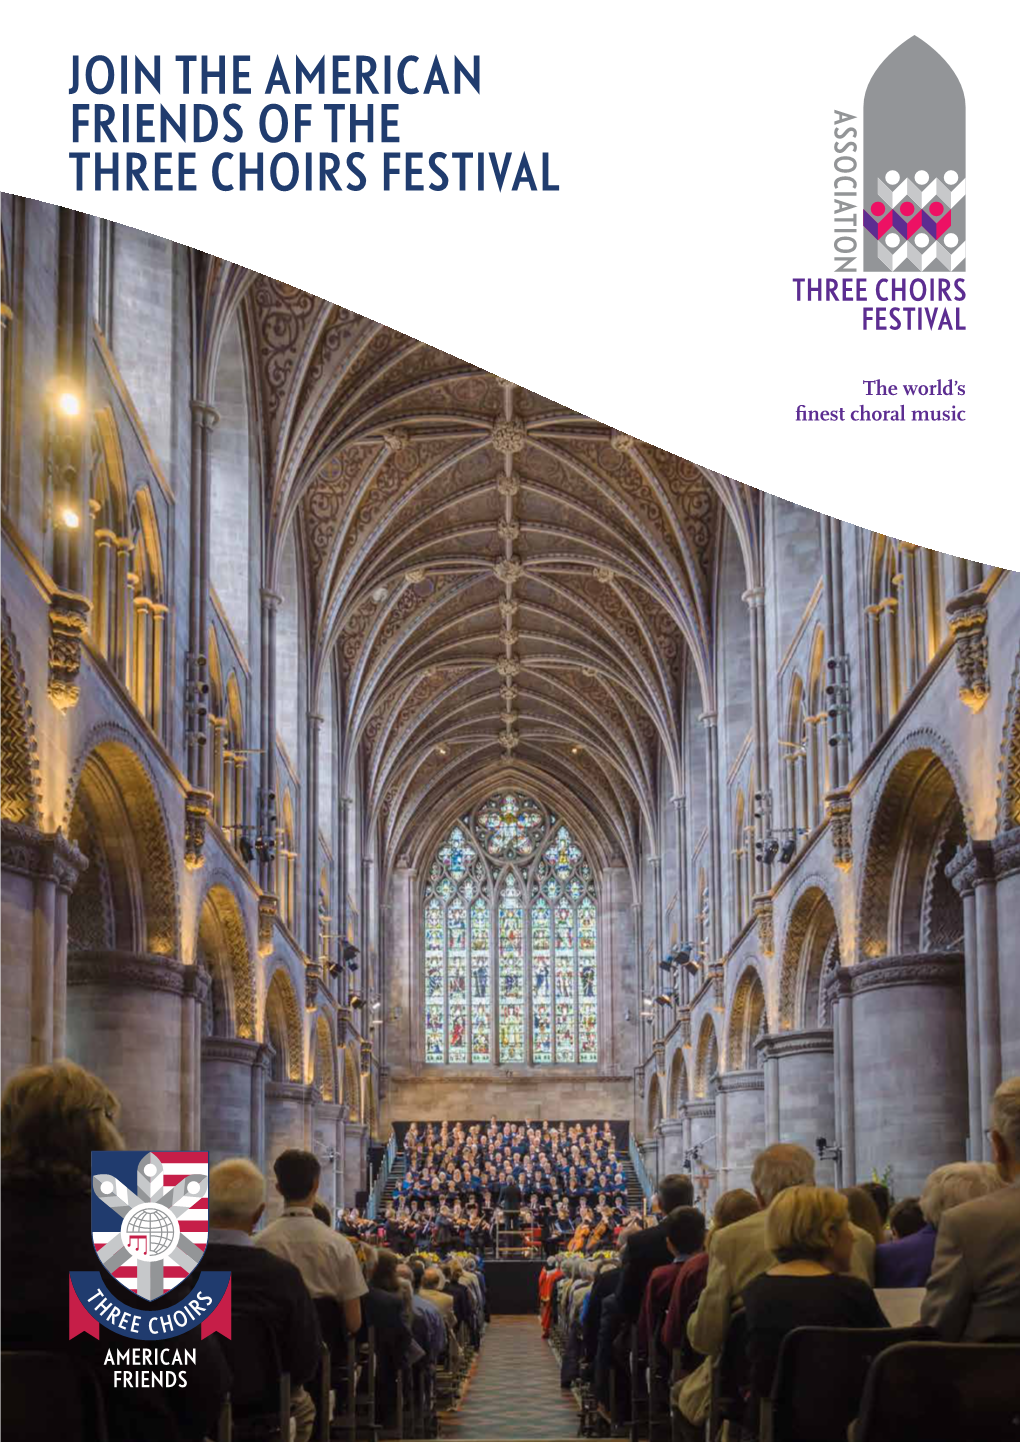 Join the American Friends of the Three Choirs Festival About the Three Choirs Festival